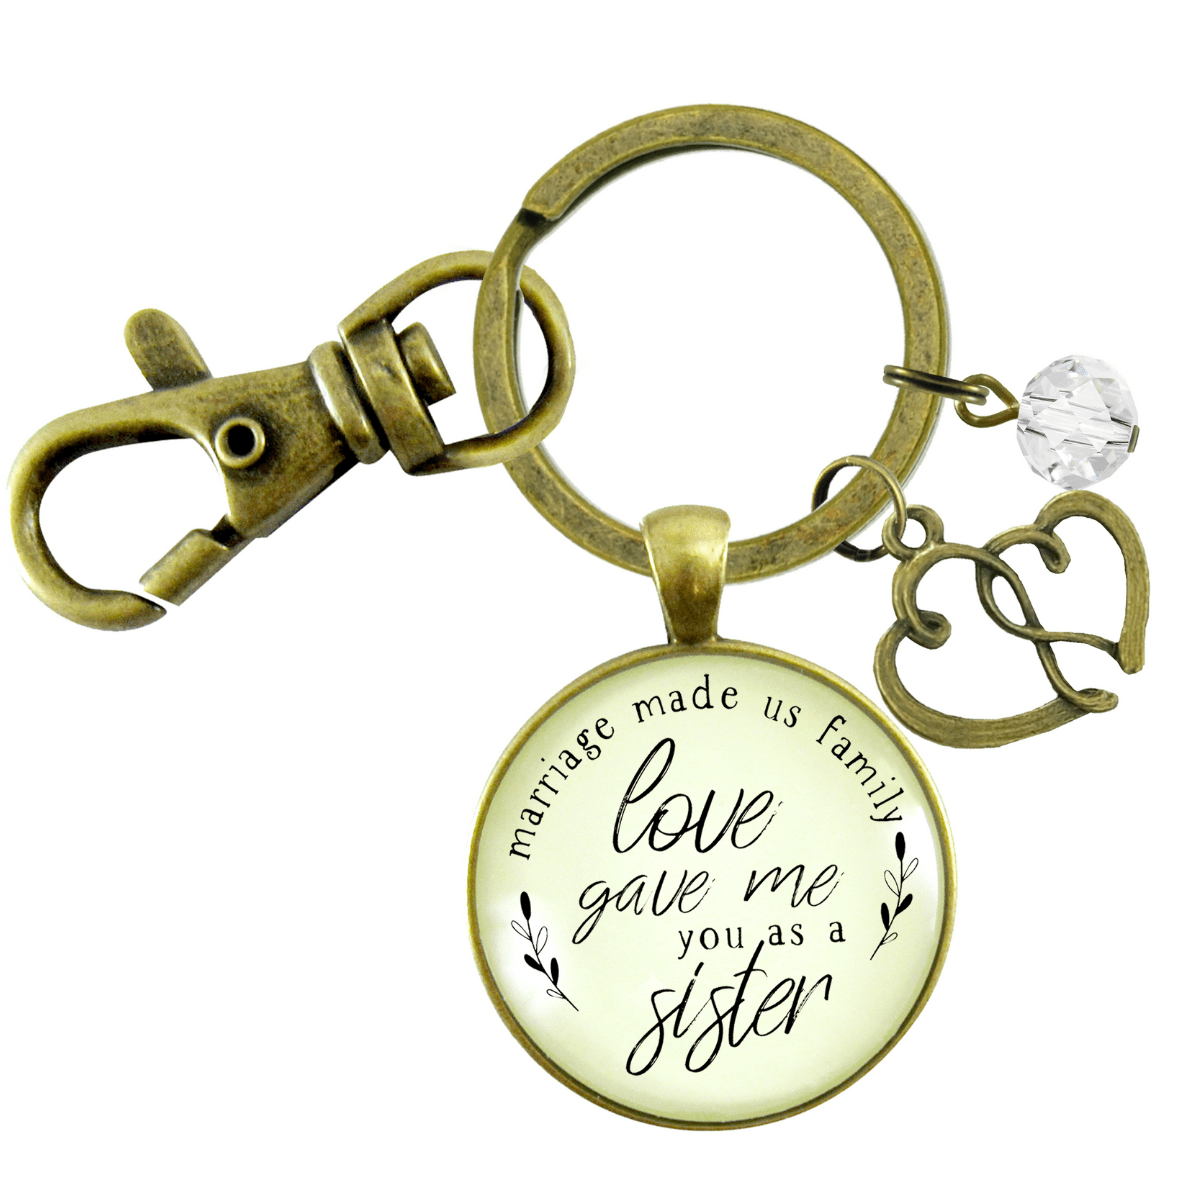 Sister In Law Keychain Marriage Made Us Family Love Gave Me You Bonus Sis Wedding Gift Jewelry - Gutsy Goodness Handmade Jewelry;Sister In Law Keychain Marriage Made Us Family Love Gave Me You Bonus Sis Wedding Gift Jewelry - Gutsy Goodness Handmade Jewelry Gifts